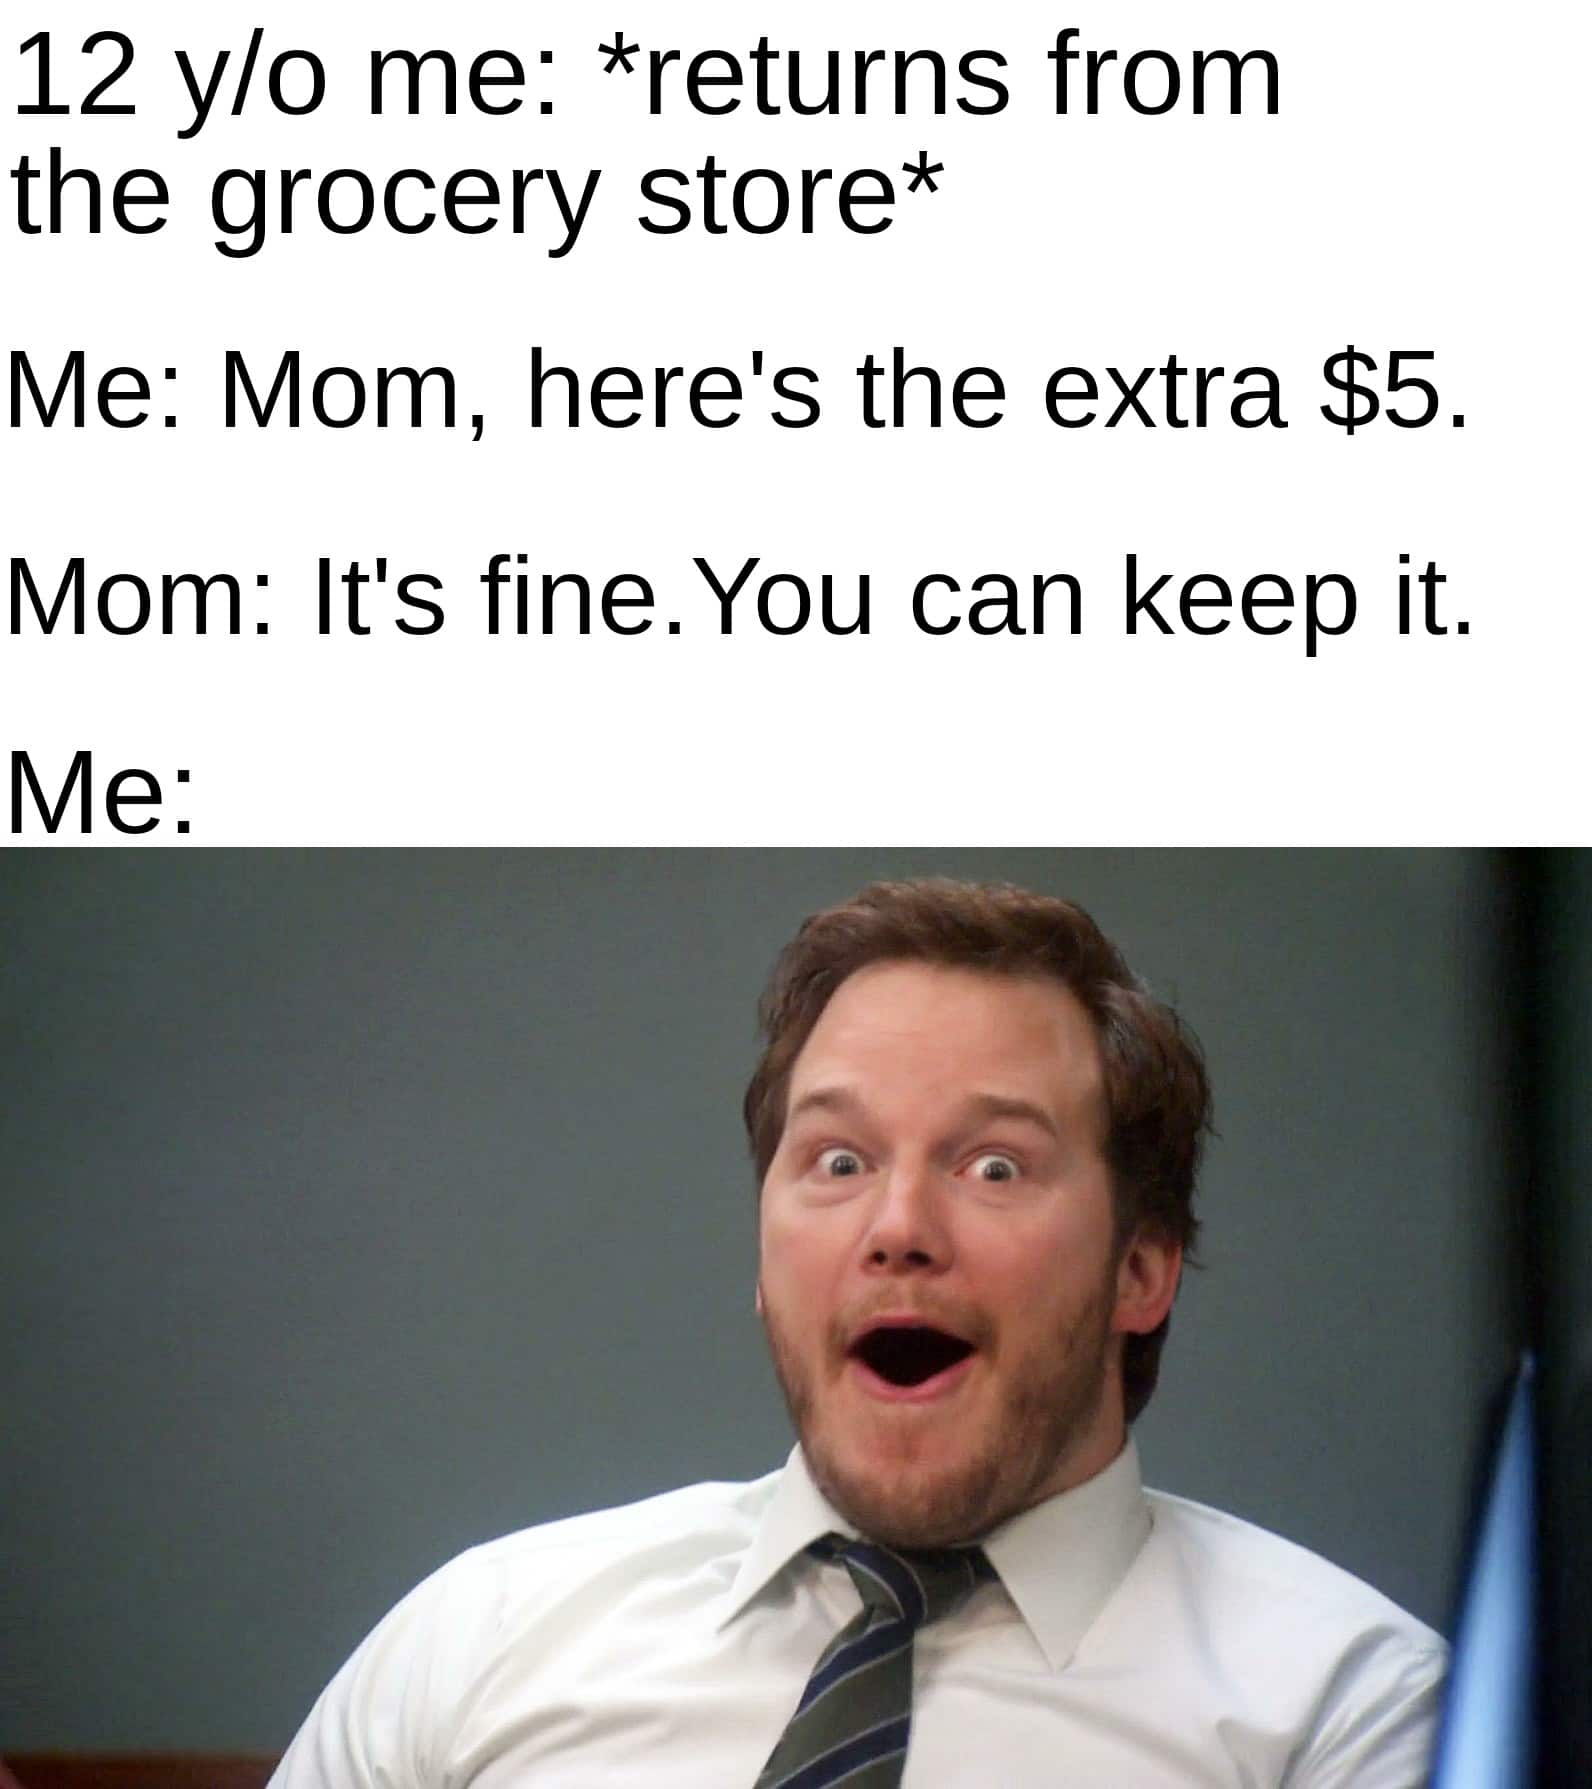 Funny, Timmy, Mars other memes Funny, Timmy, Mars text: 12 y/o me: *returns from the grocery store* Me: Mom, here's the extra $5. Mom: It's fine. You can keep it. 